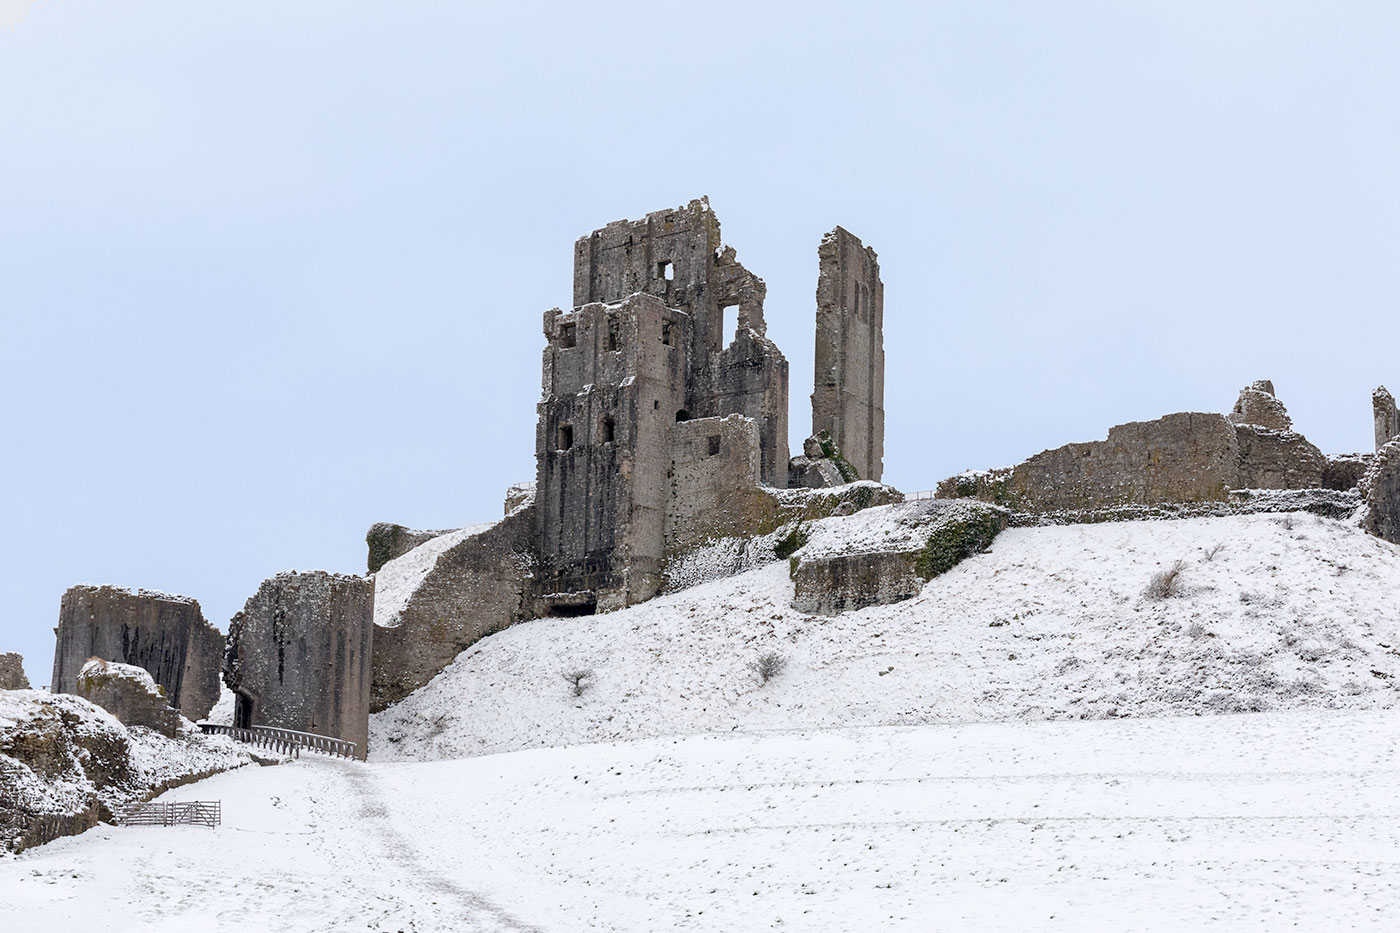 Looking Up at Corfe Castle in the snow